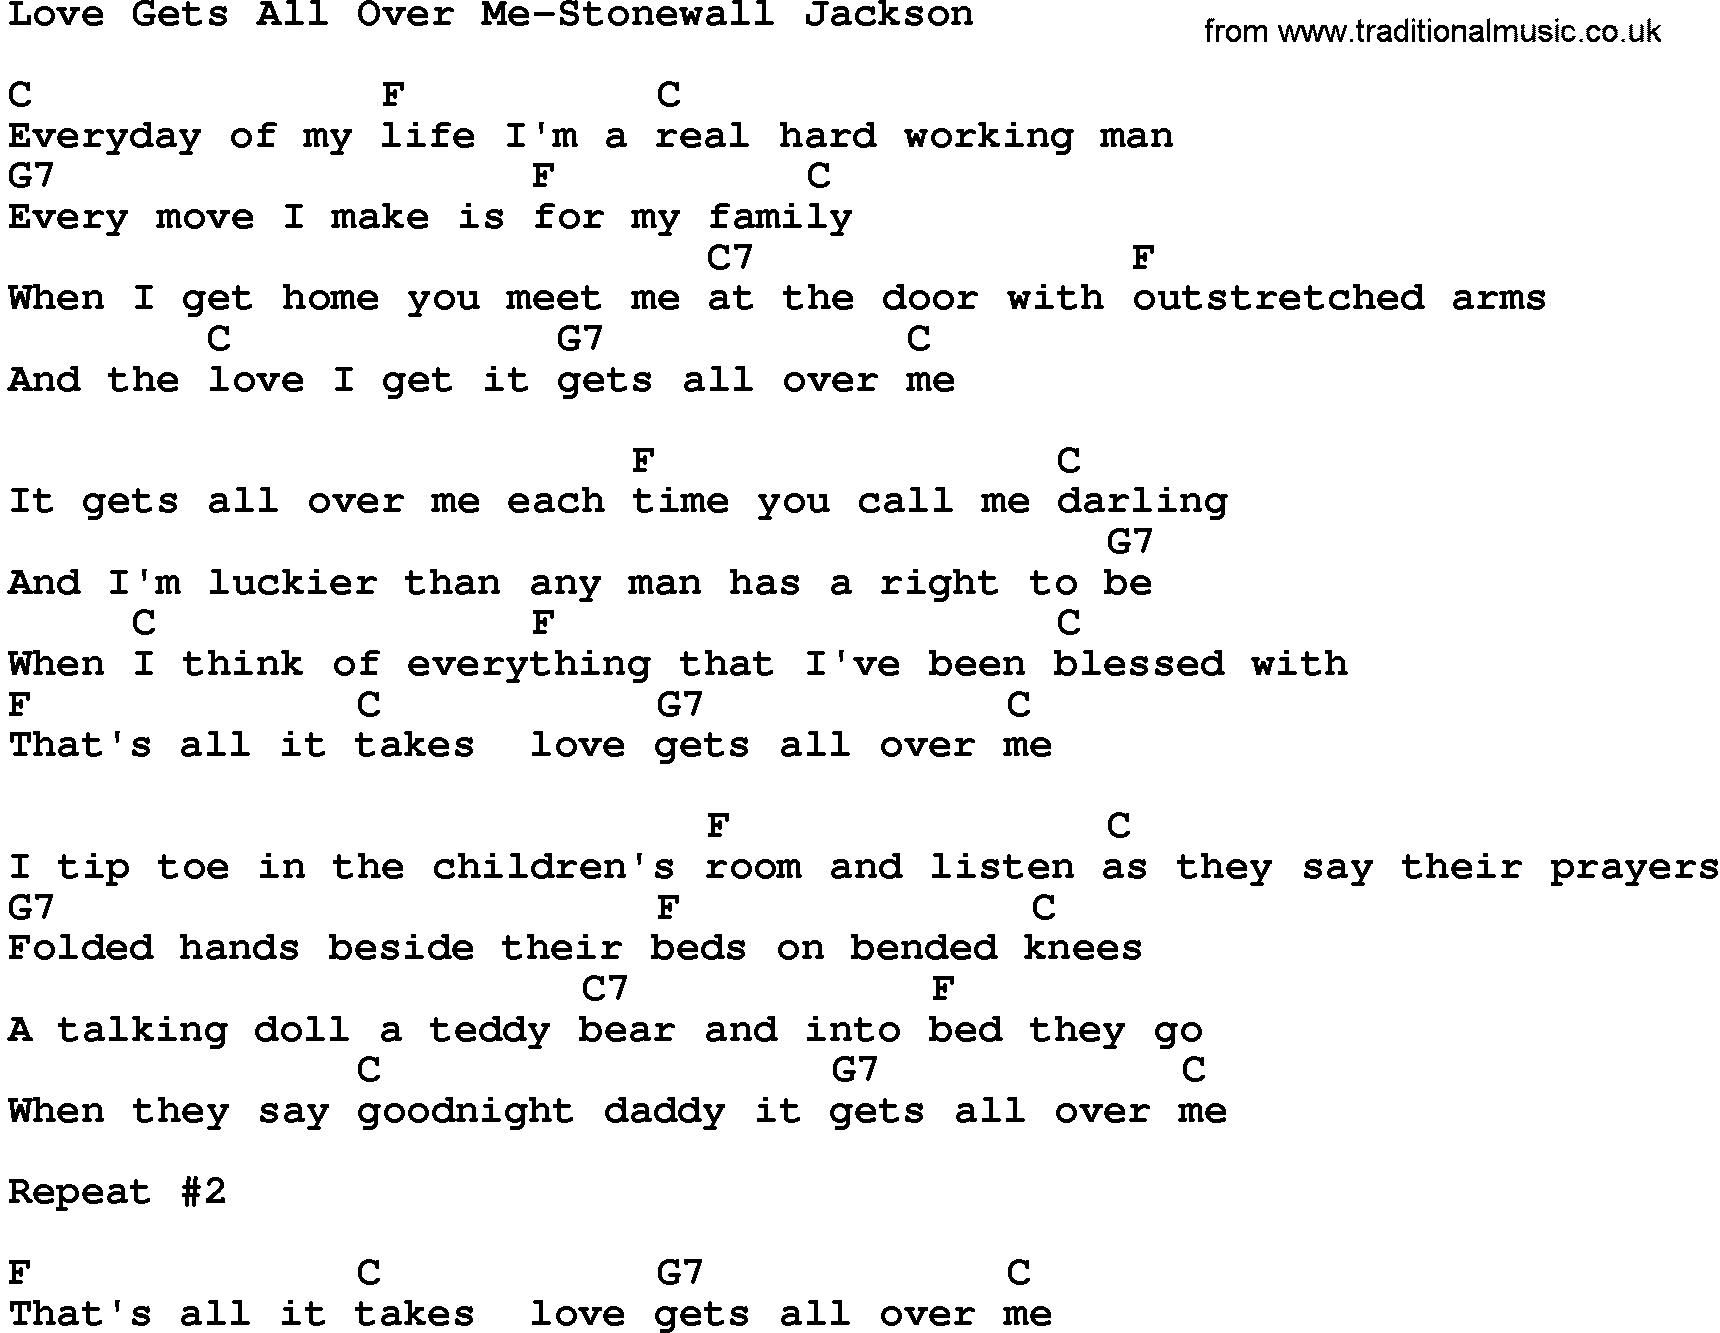 Country music song: Love Gets All Over Me-Stonewall Jackson lyrics and chords